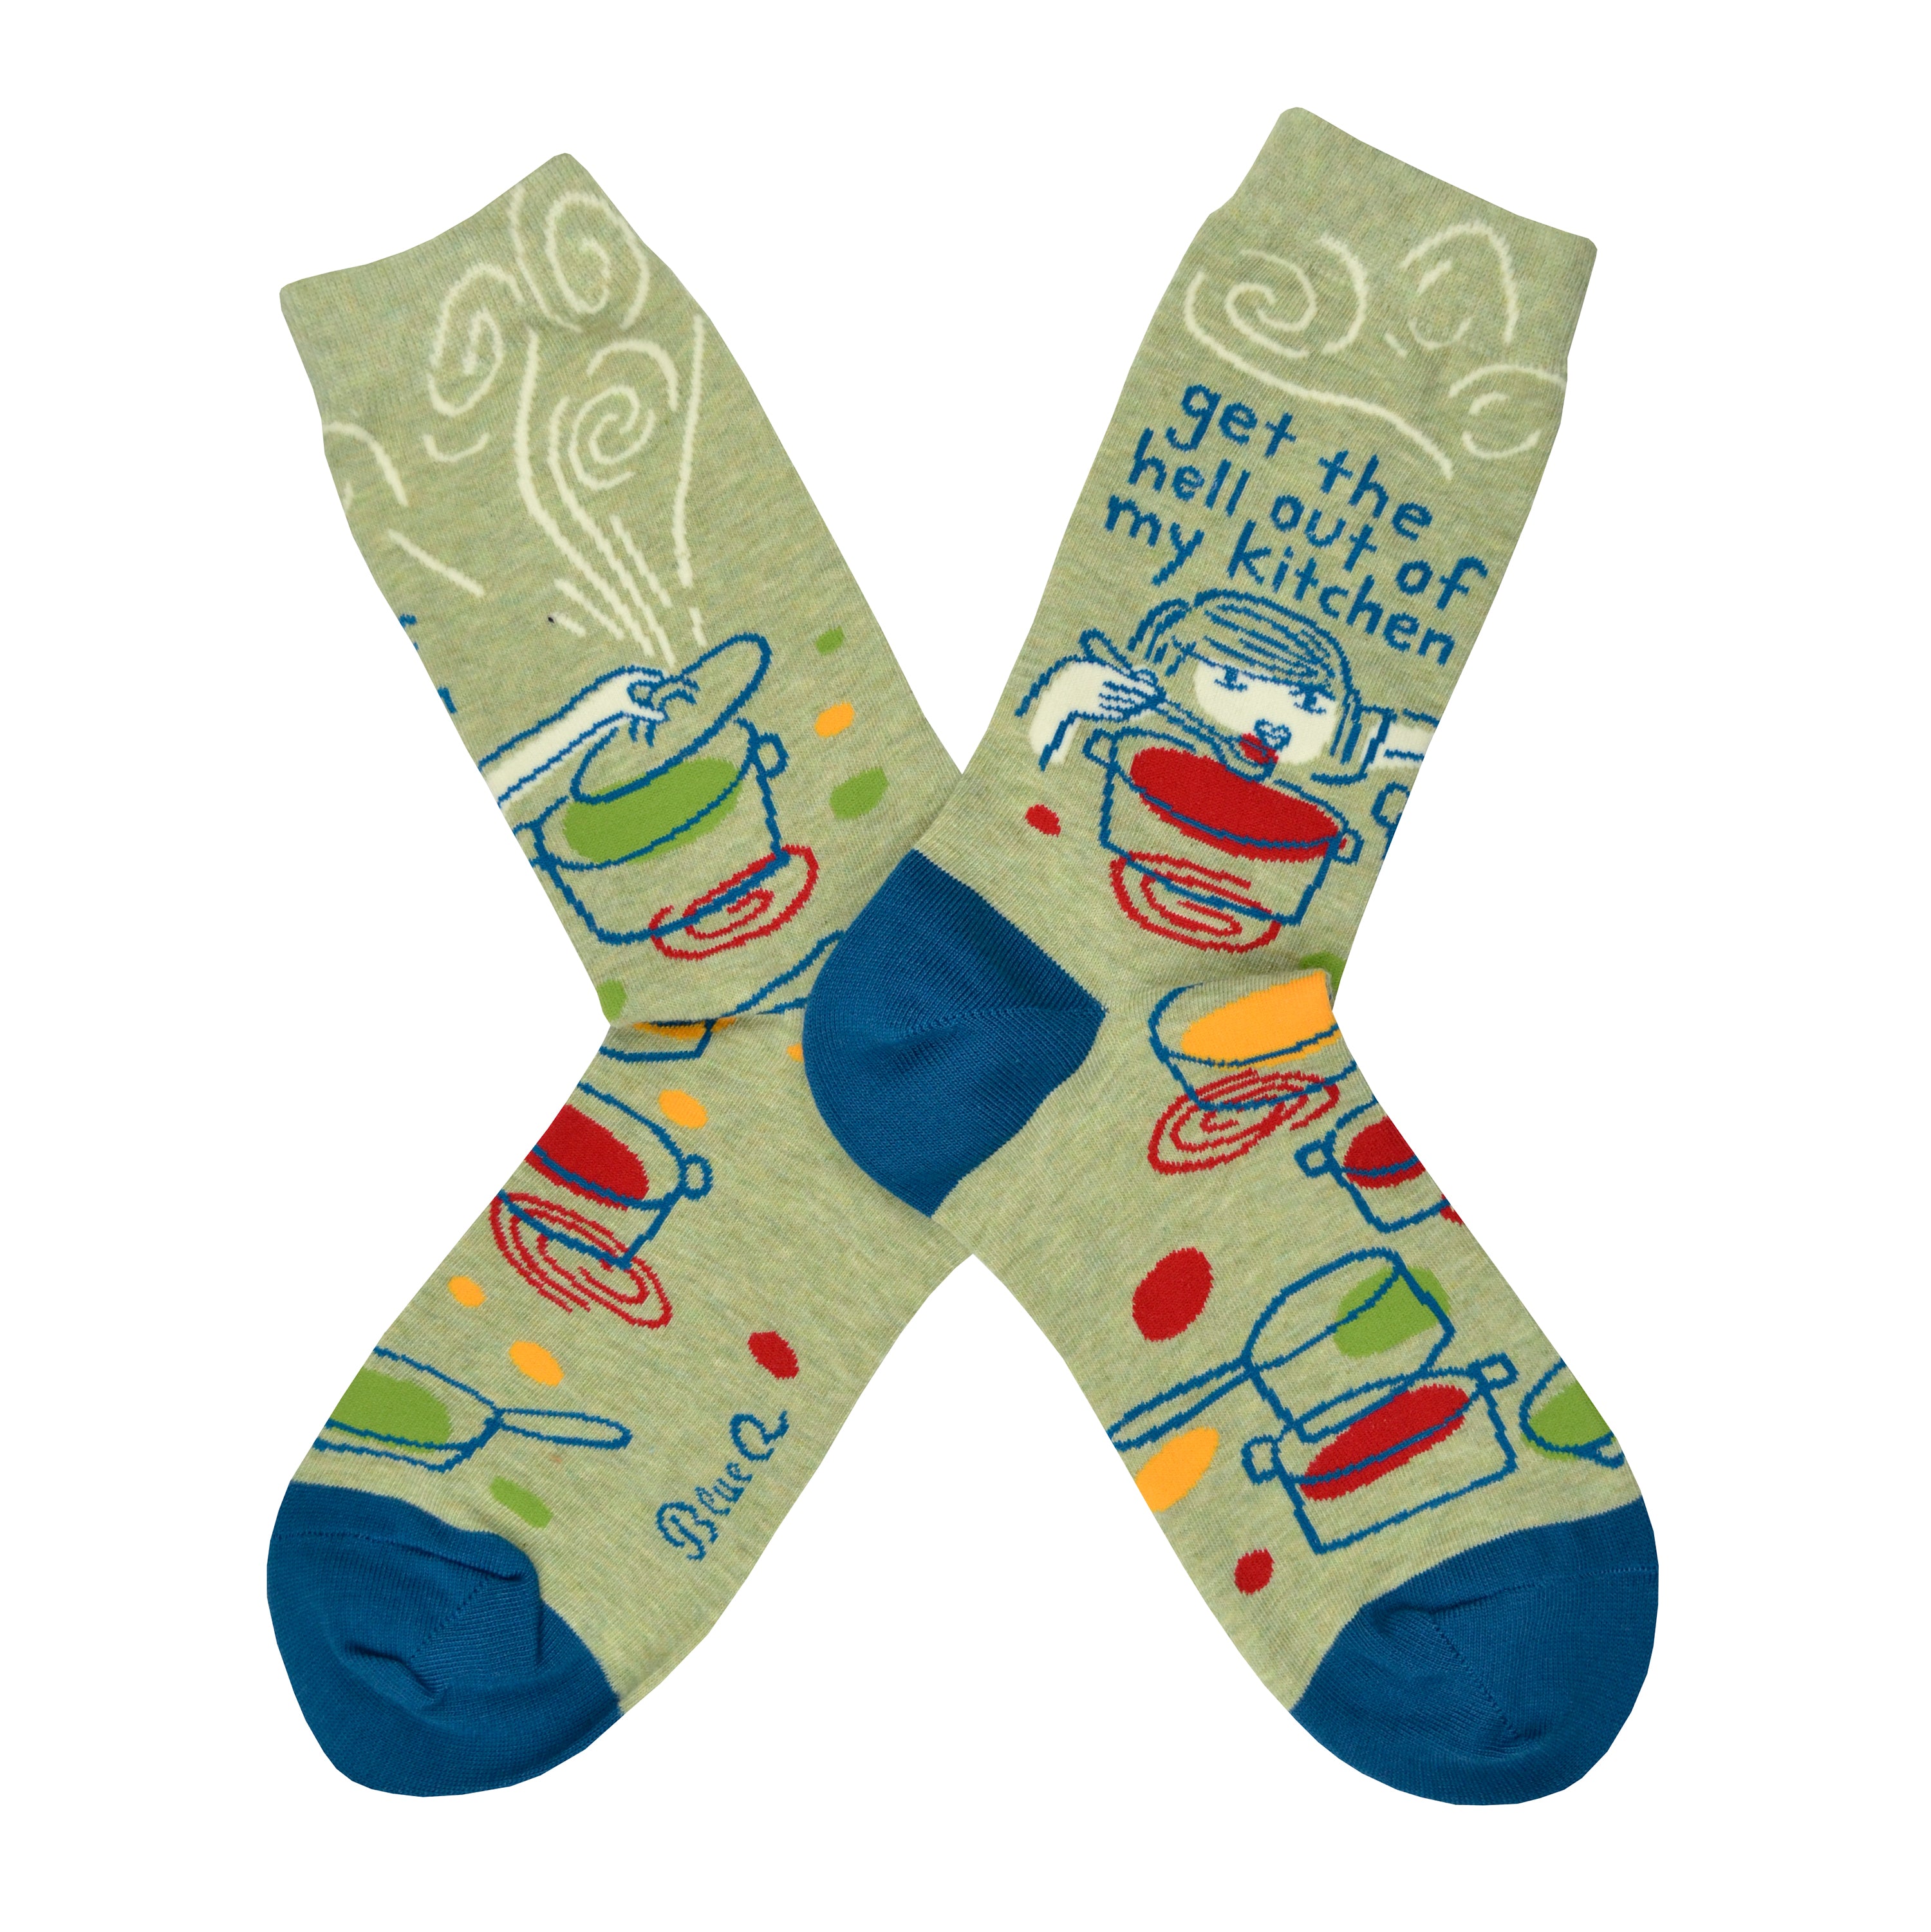 Shown in a flatlay, a pair of women's Blue Q cotton crew socks in olive green with a blue heel and toe. These socks feature a cartoon women over a pot with a spoon and the phrase, 